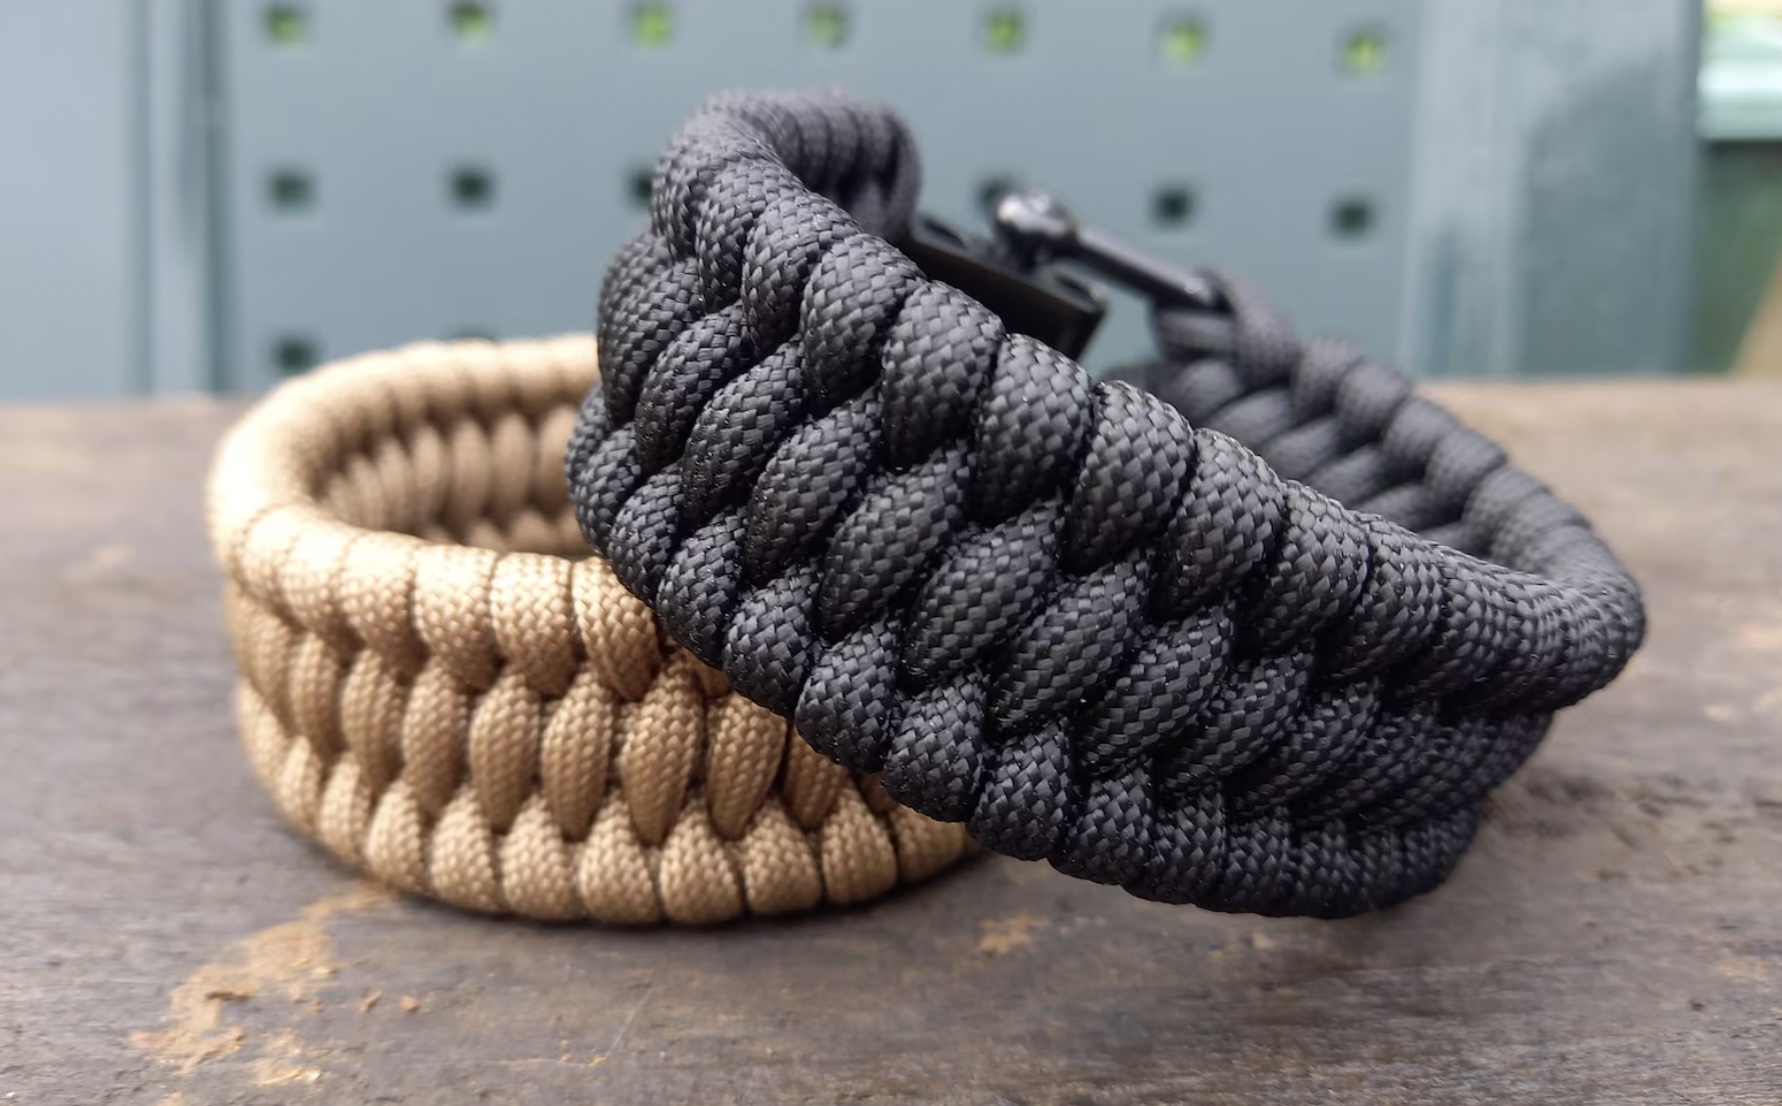 Two paracord bracelets, one beige and one black